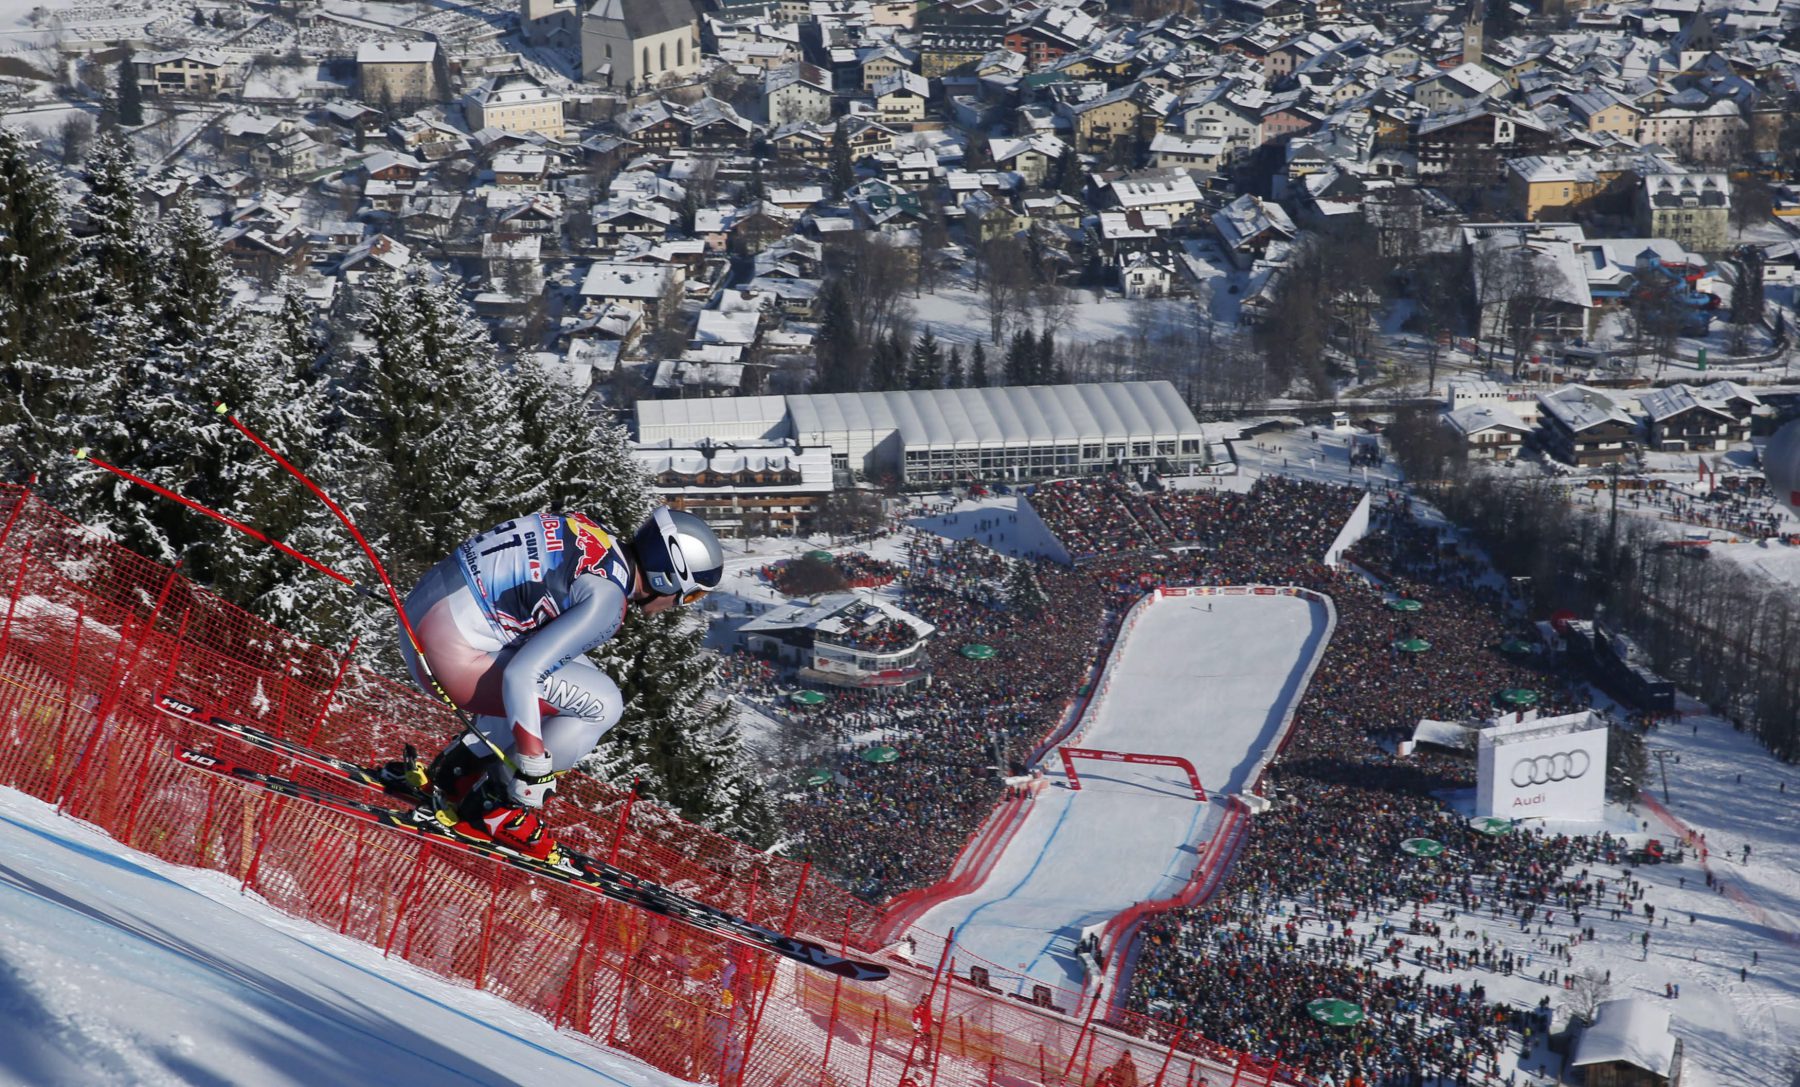 Canada's Erik Guay speeds down the course on his way to take second place in an alpine skiing men's World Cup downhill, in Kitzbuehel, Austria, Saturday, Jan. 26, 2013. (AP Photo/Shinichiro Tanaka)